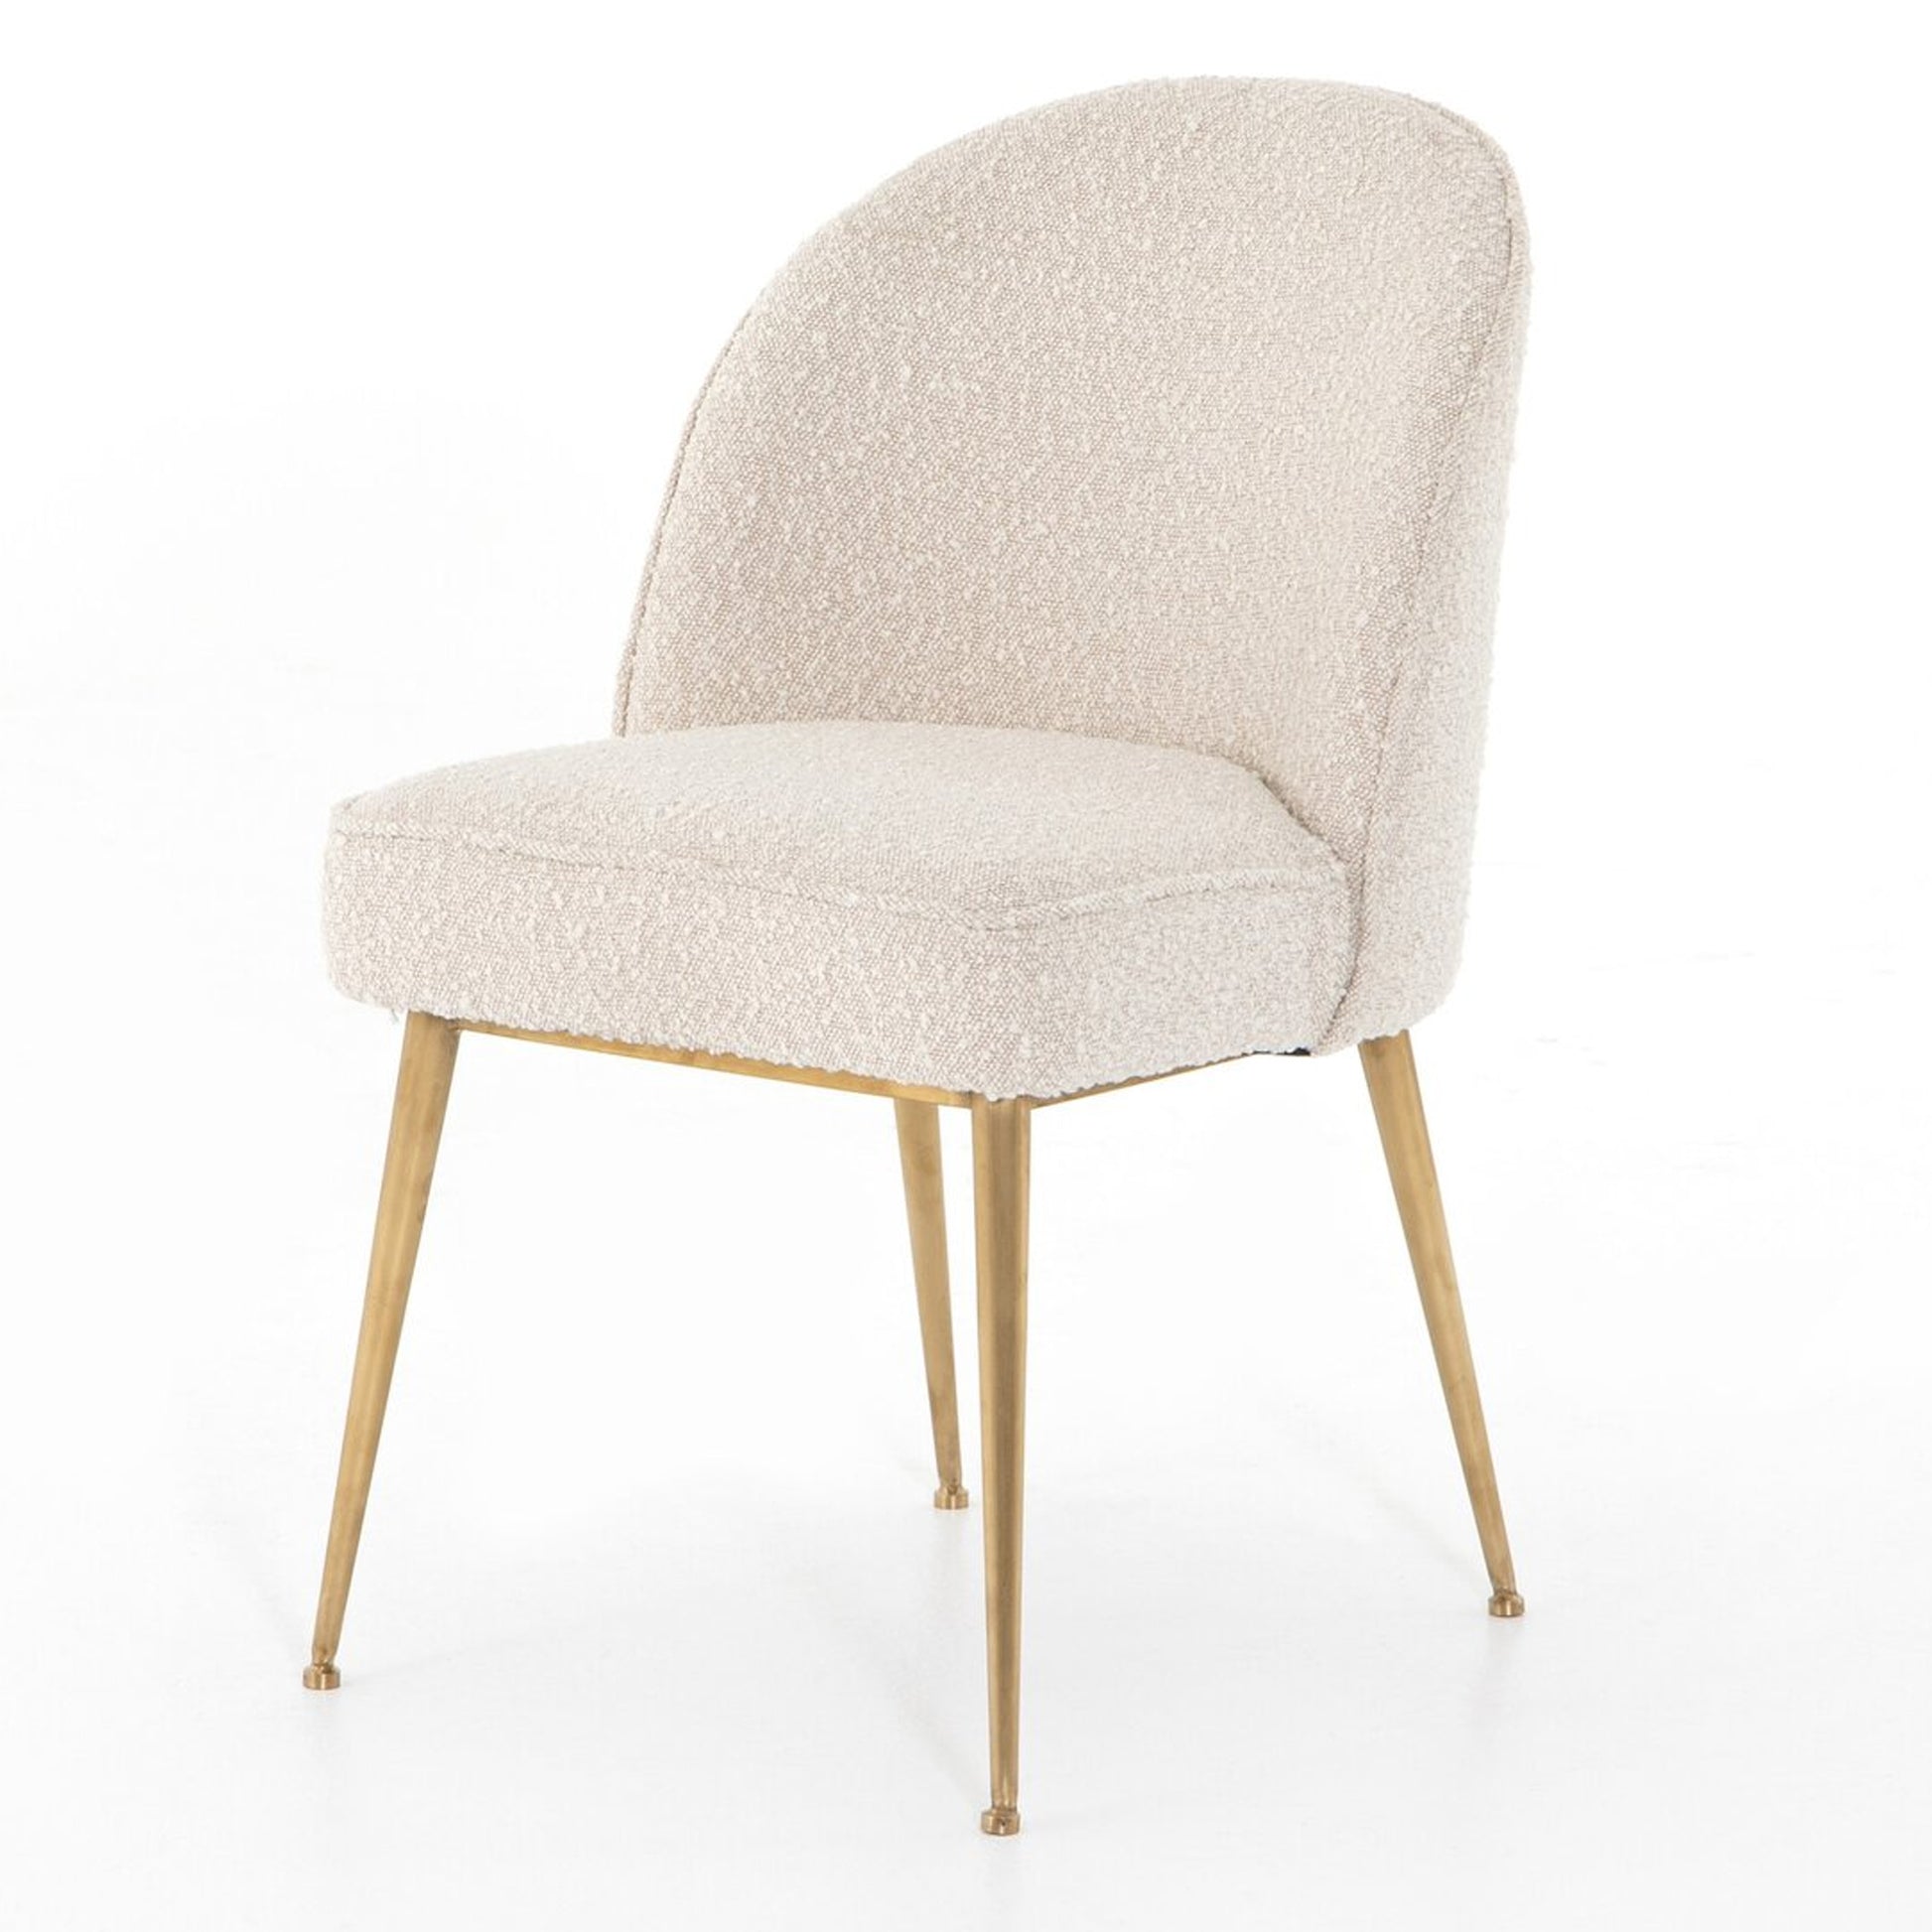 Ora Armless Dining Chair - IONS DESIGN